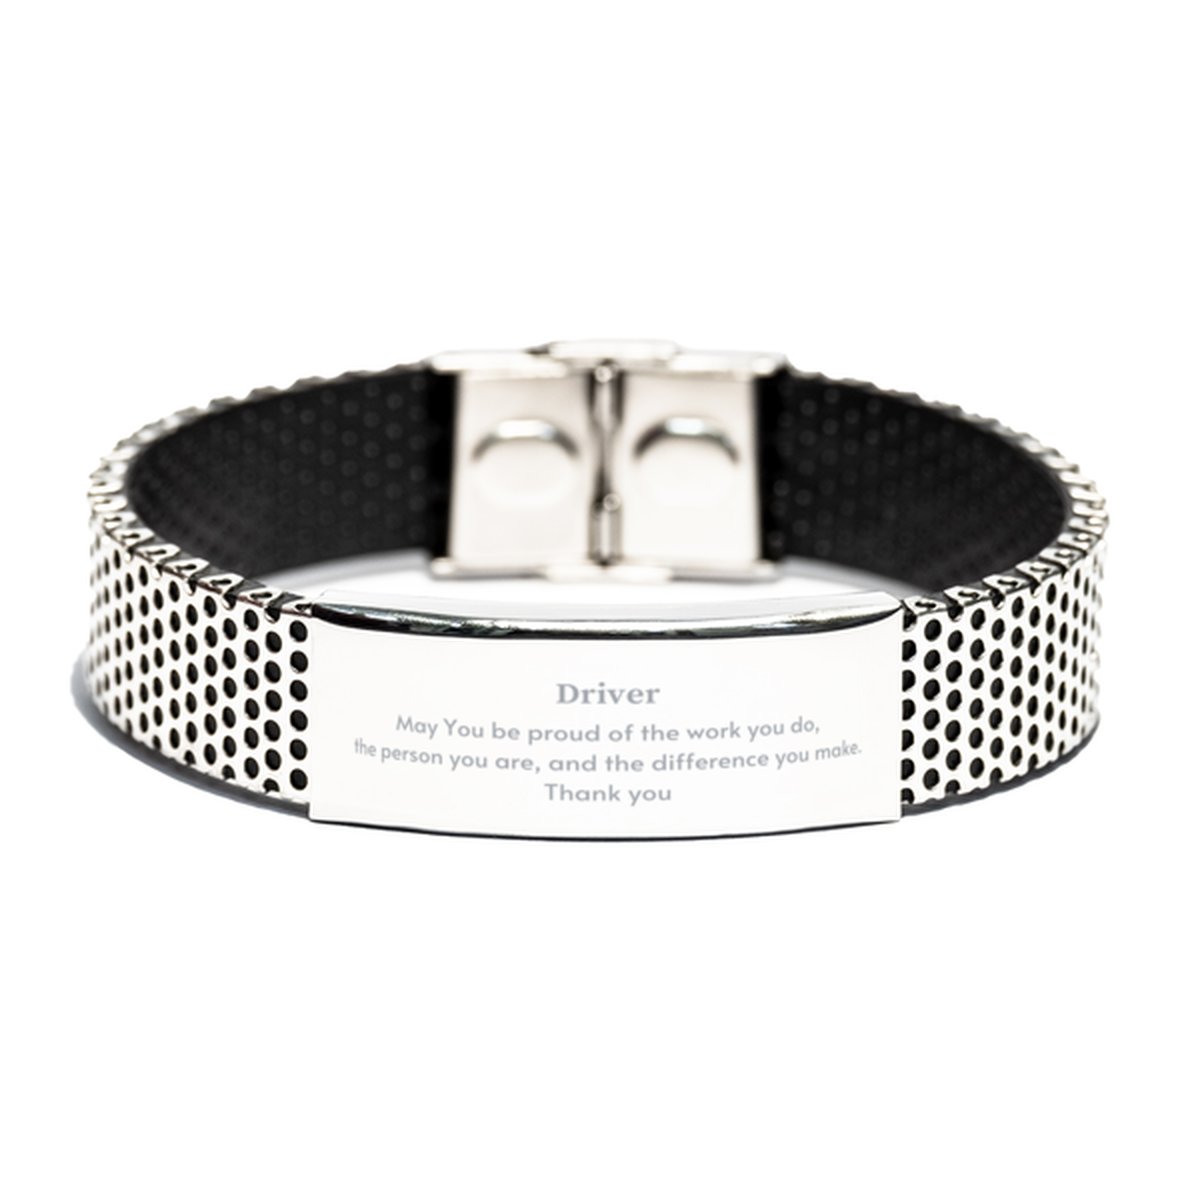 Heartwarming Stainless Steel Bracelet Retirement Coworkers Gifts for Driver, Driver May You be proud of the work you do, the person you are Gifts for Boss Men Women Friends